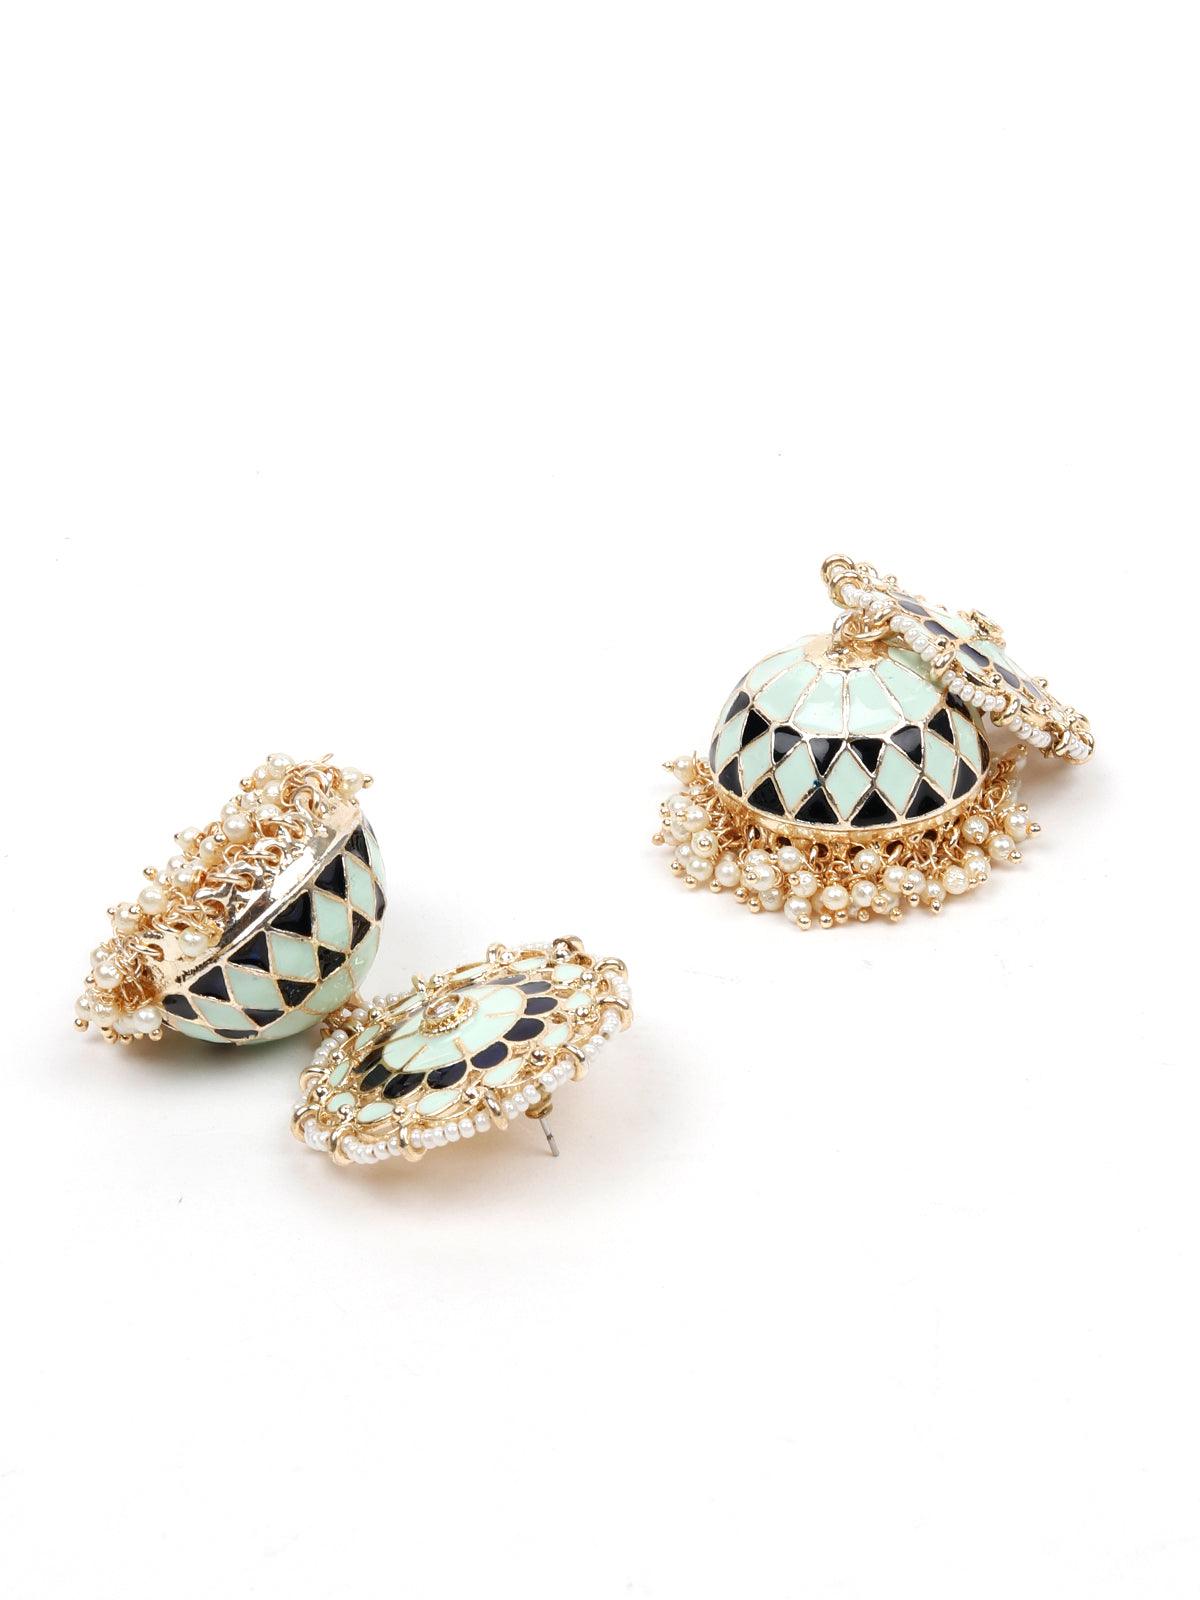 Stunning sea green and navy blue jhumkas - Odette